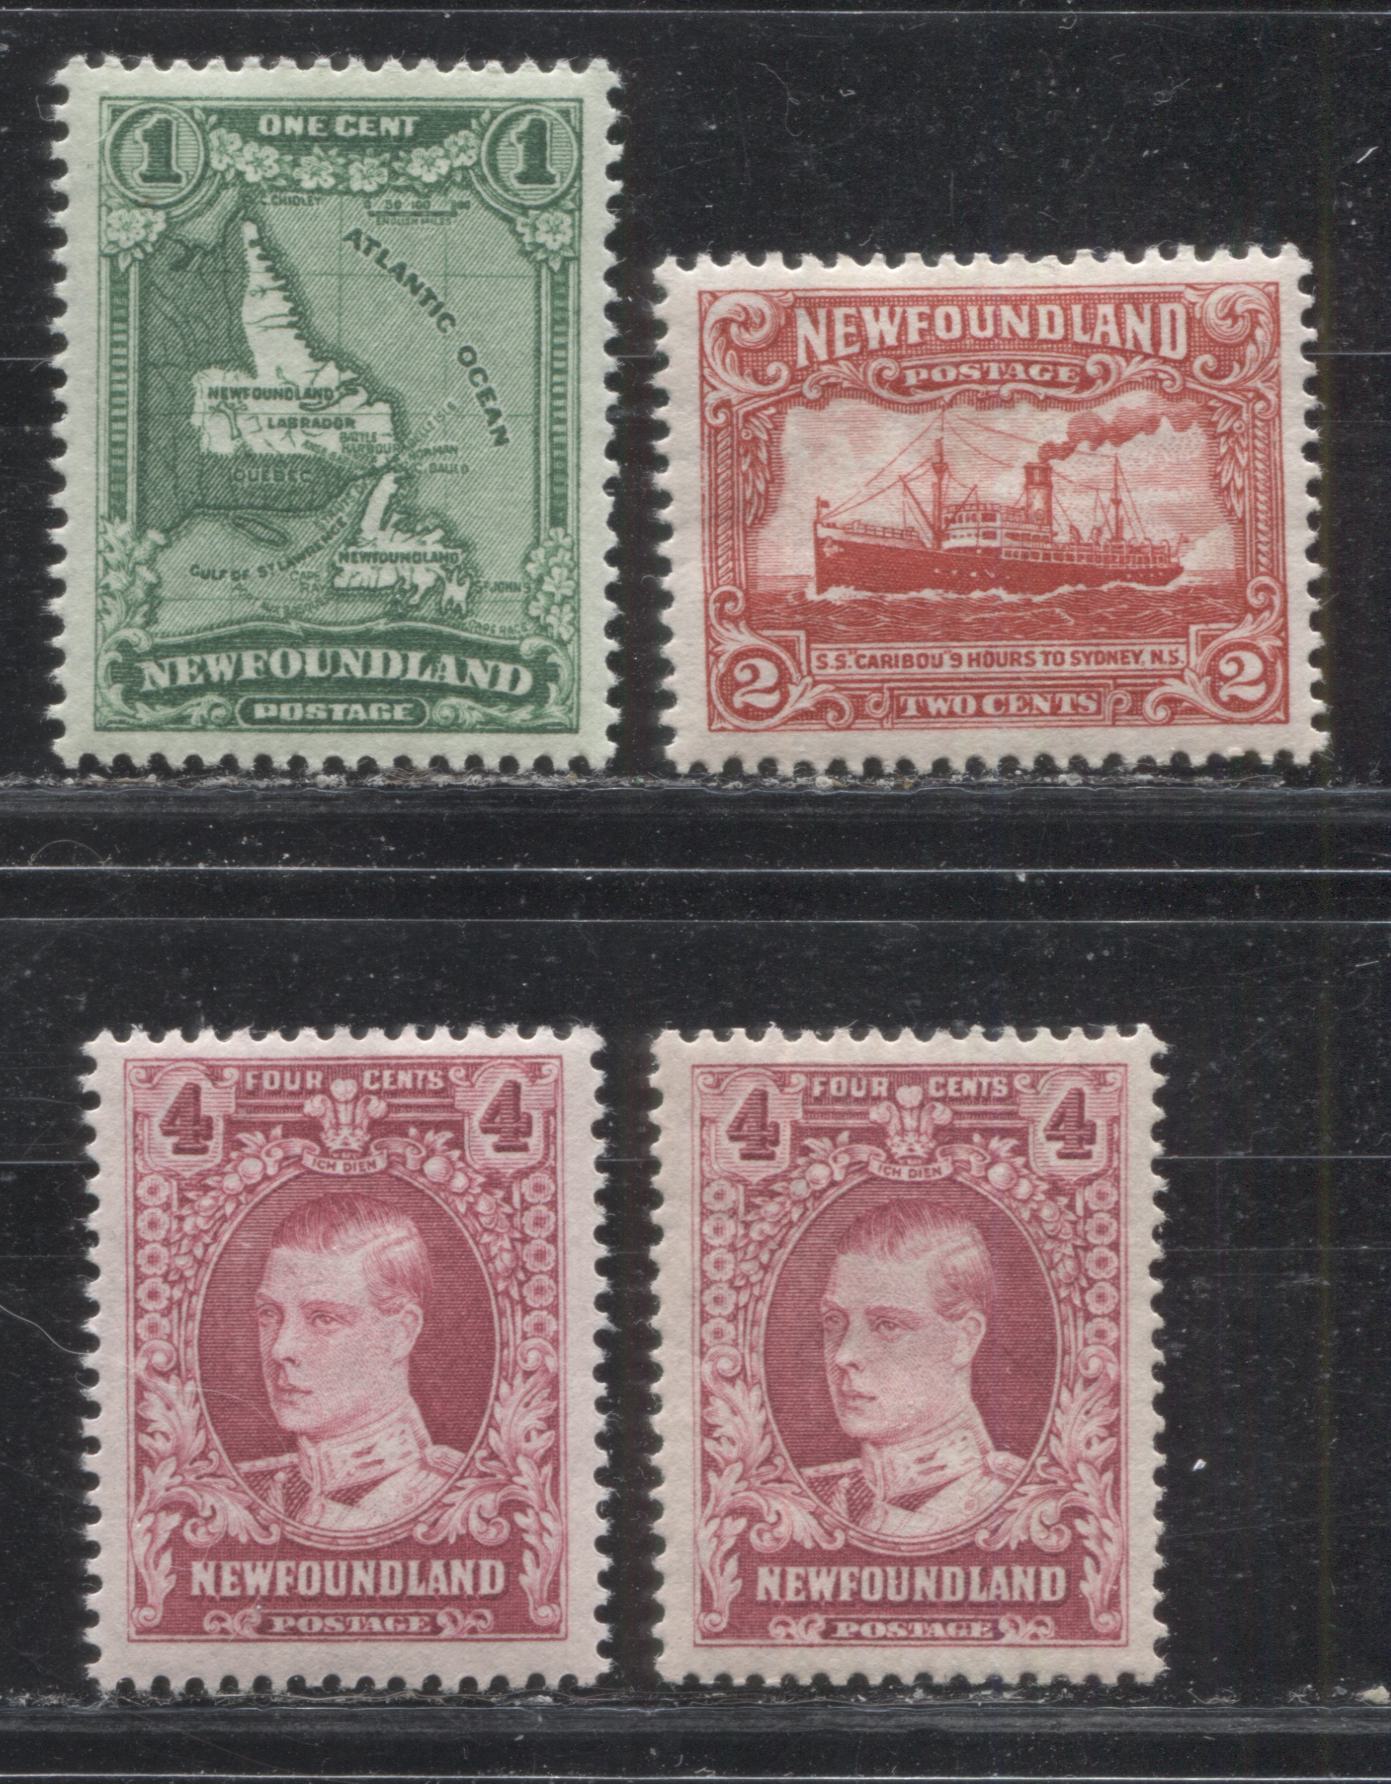 Lot 88 Newfoundland # 172/174 1c - 4c Green - Lilac Rose Map of Newfoundland - Prince of Wales, 1931-1932 Watermarked Publicity Issue, Four VFOG Examples, Various Comb Perfs